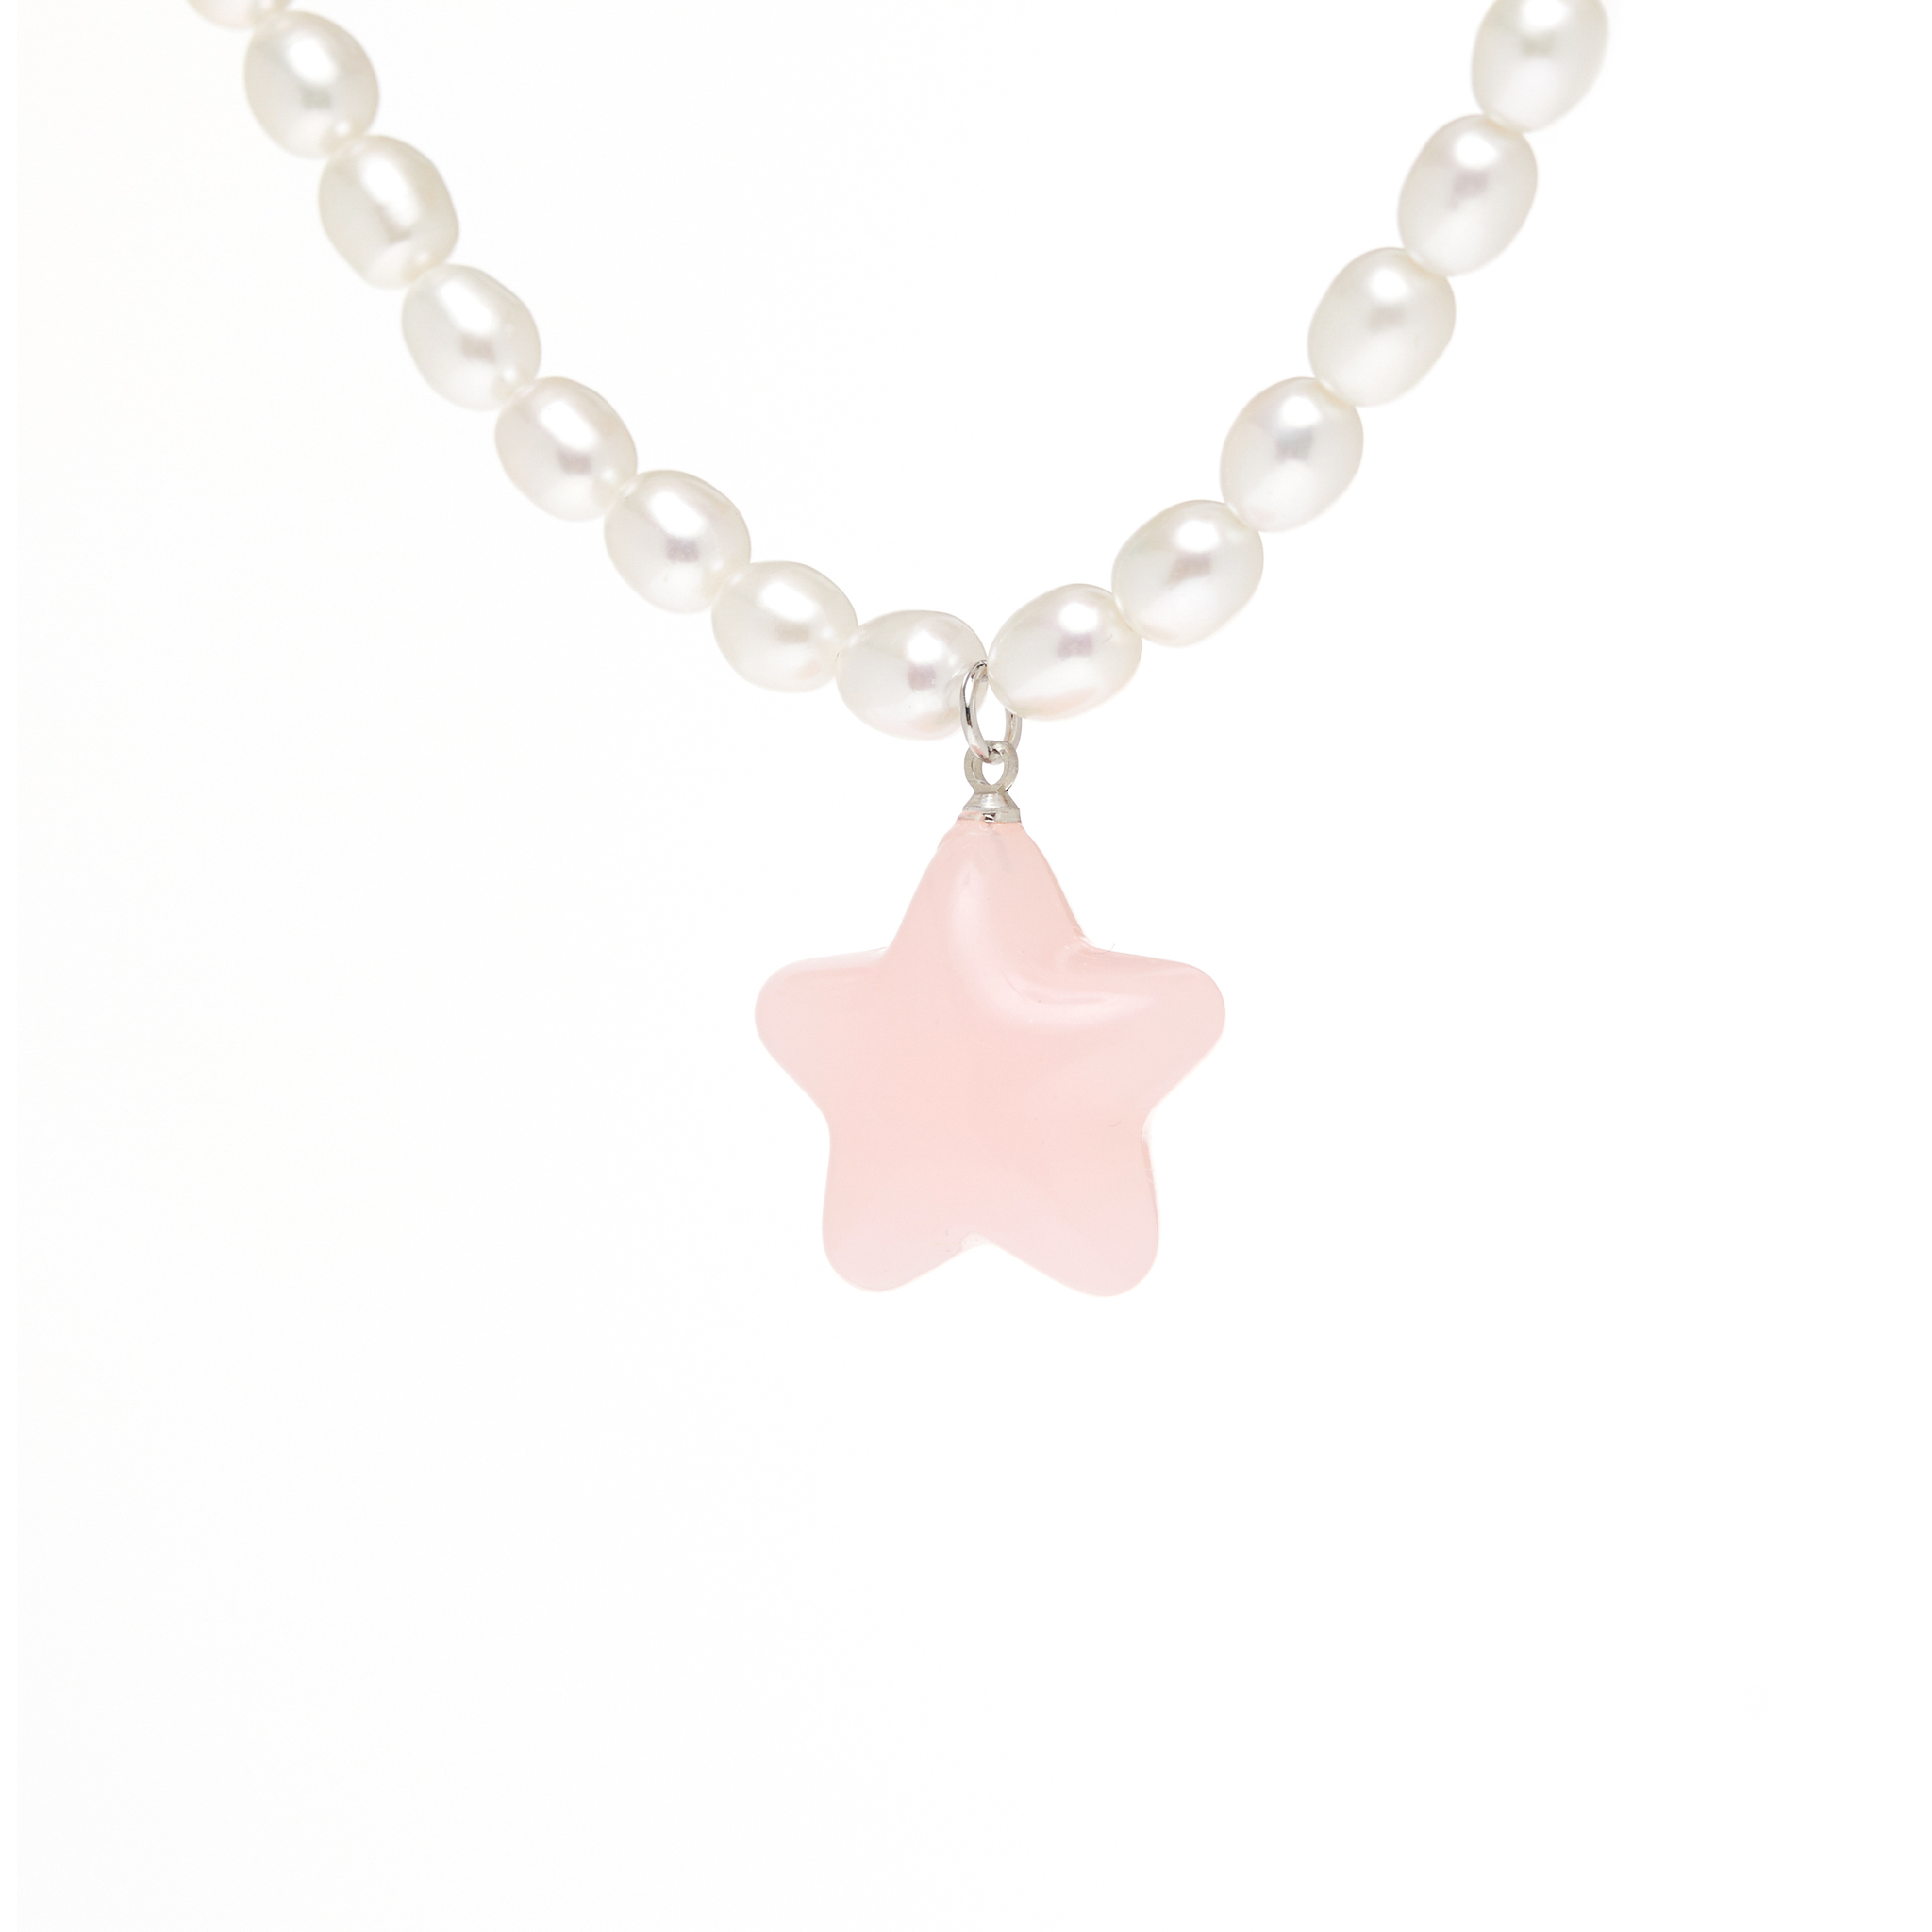 Pastel Pink Star Necklace